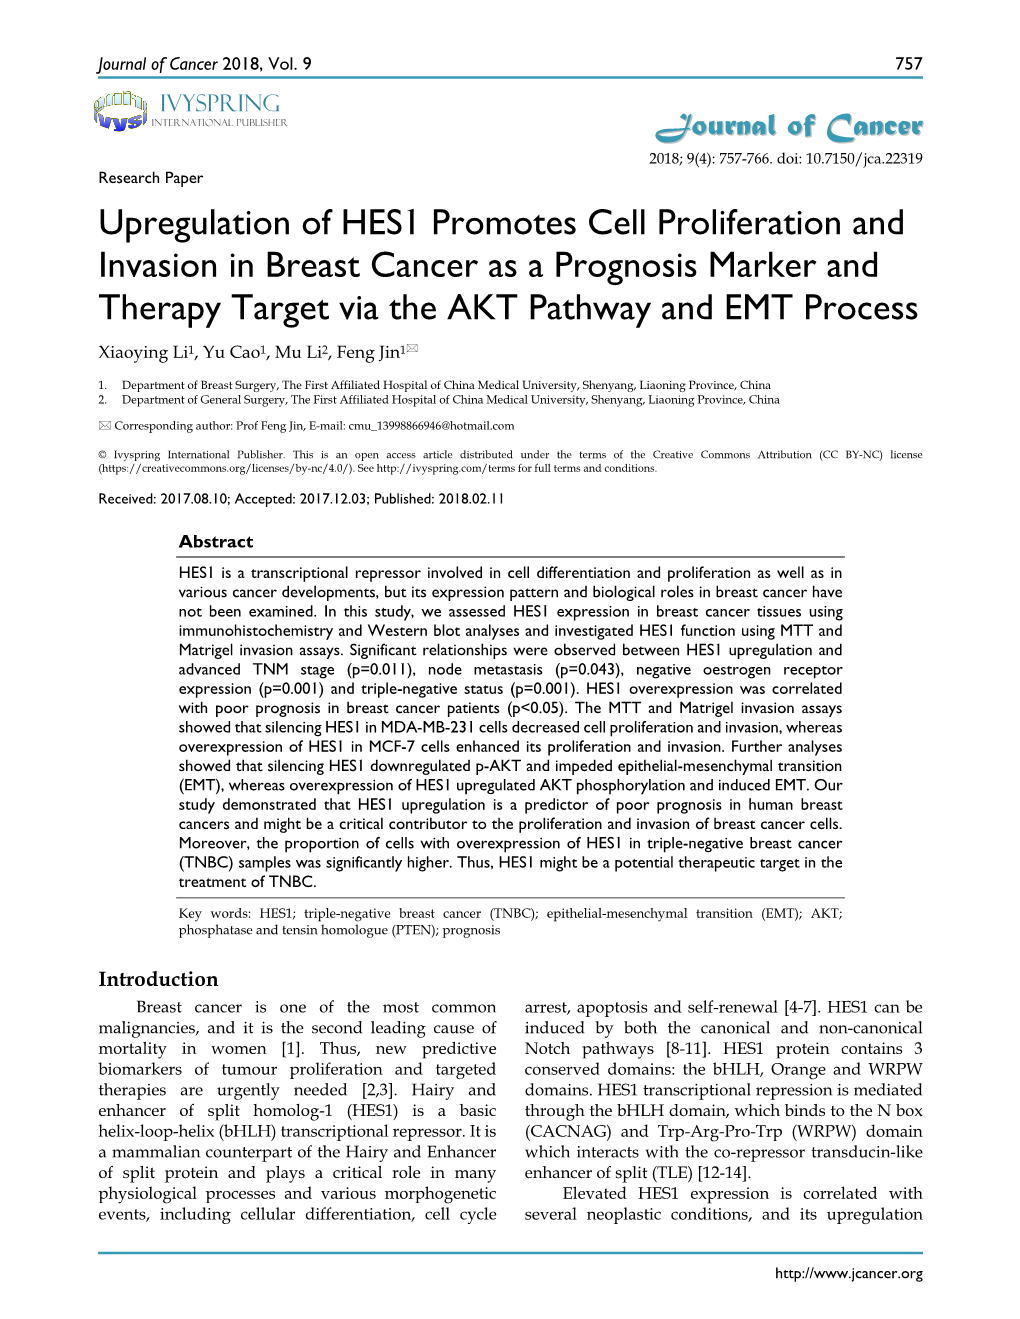 Upregulation of HES1 Promotes Cell Proliferation and Invasion in Breast